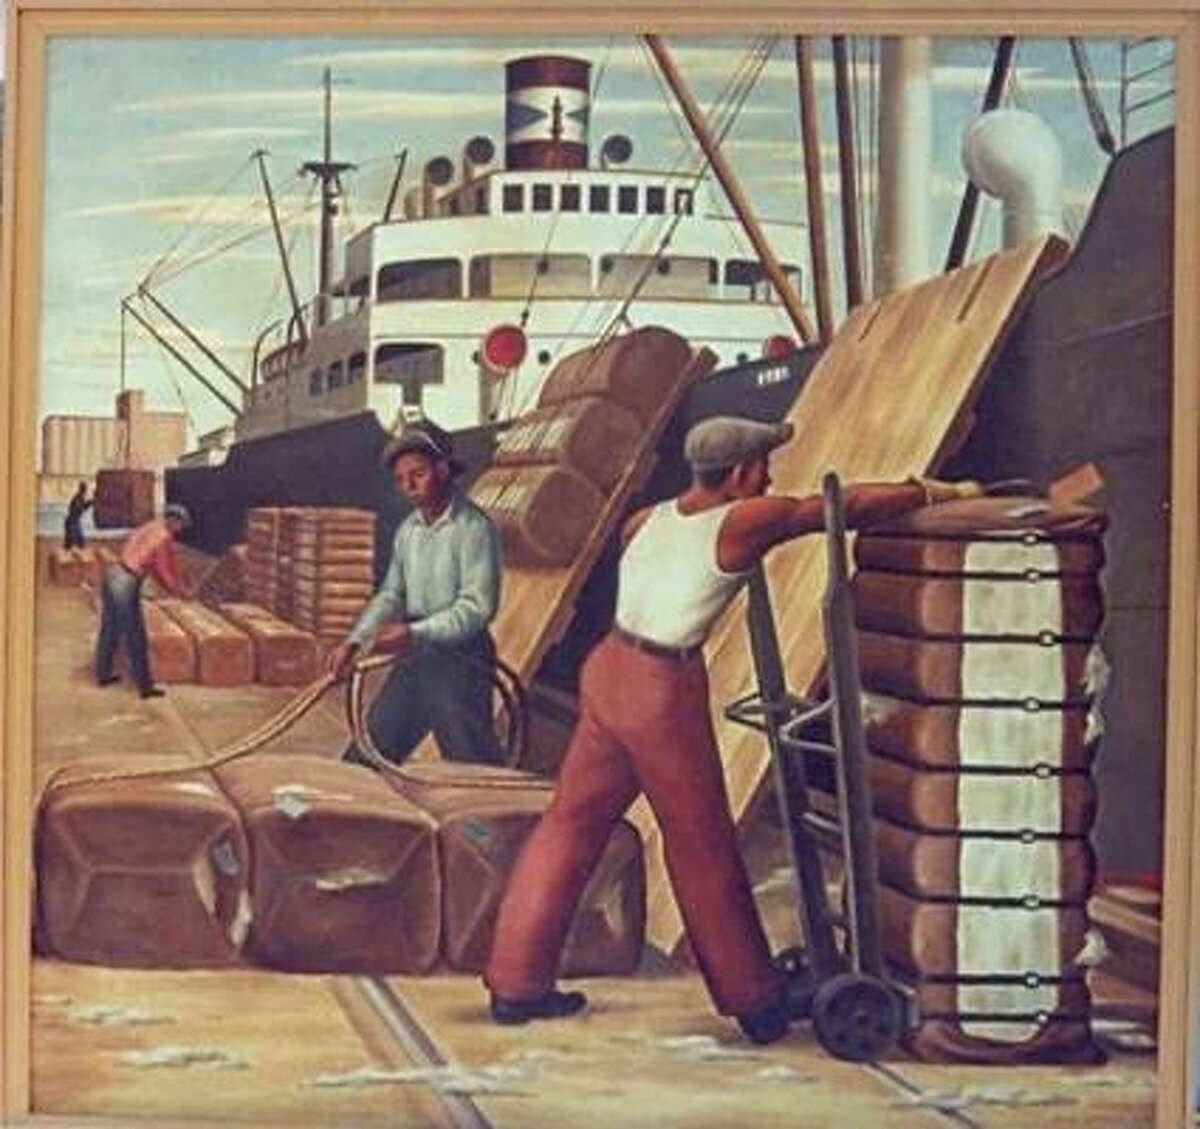 Painter Jerry Bywaters' 1941 piece, “Loading Cotton,” is among the New Deal-era works that will be displayed in the federal courthouse.